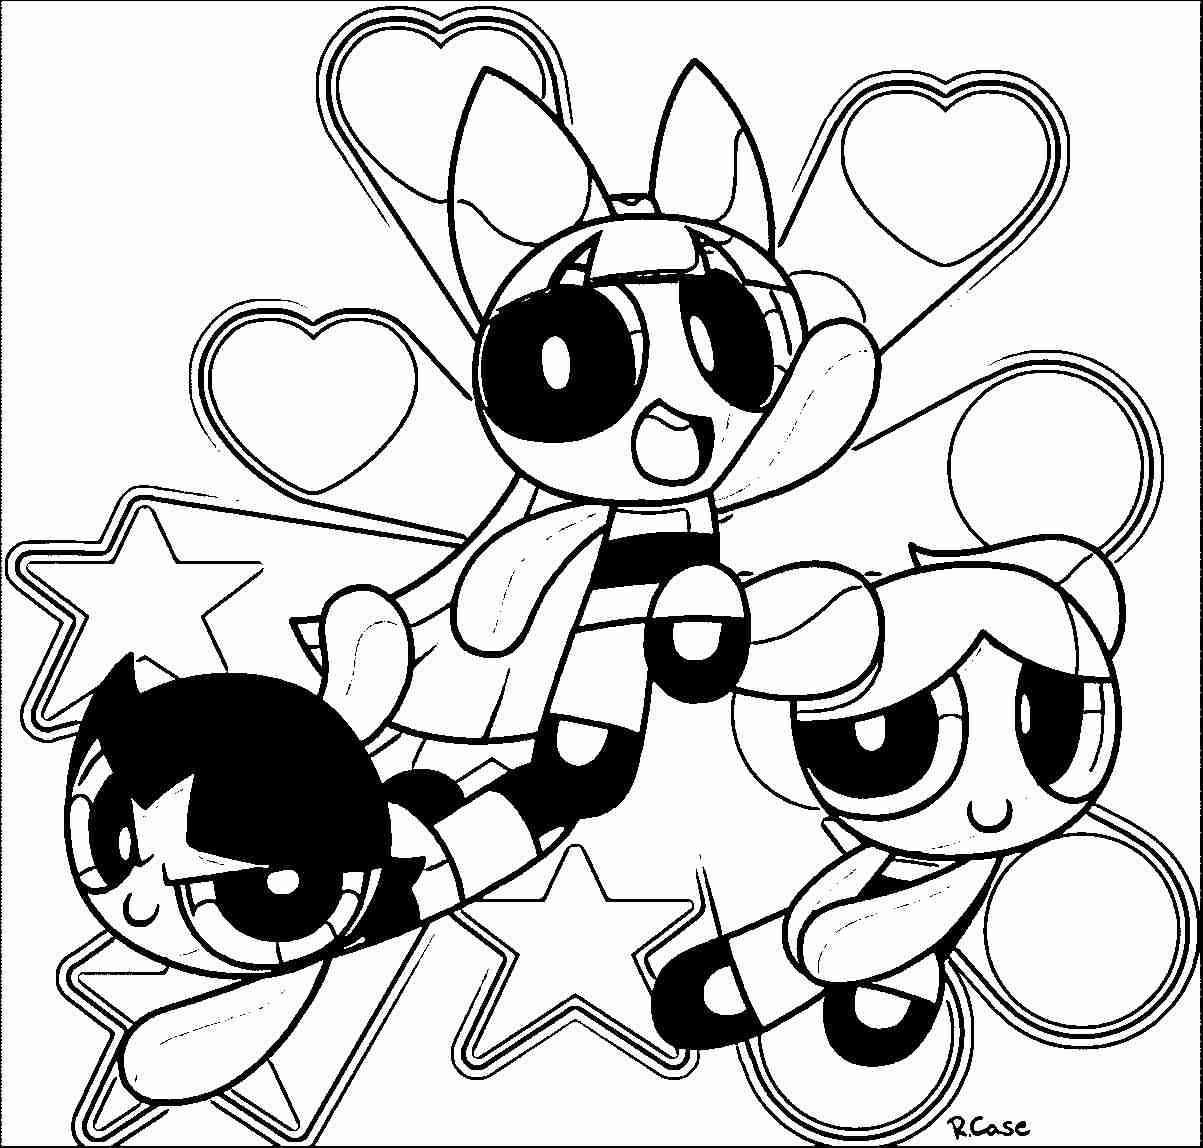 Coloring Pages For Girls The Power Puff Power
 Powerpuff Girls Blossom Coloring Pages thekindproject